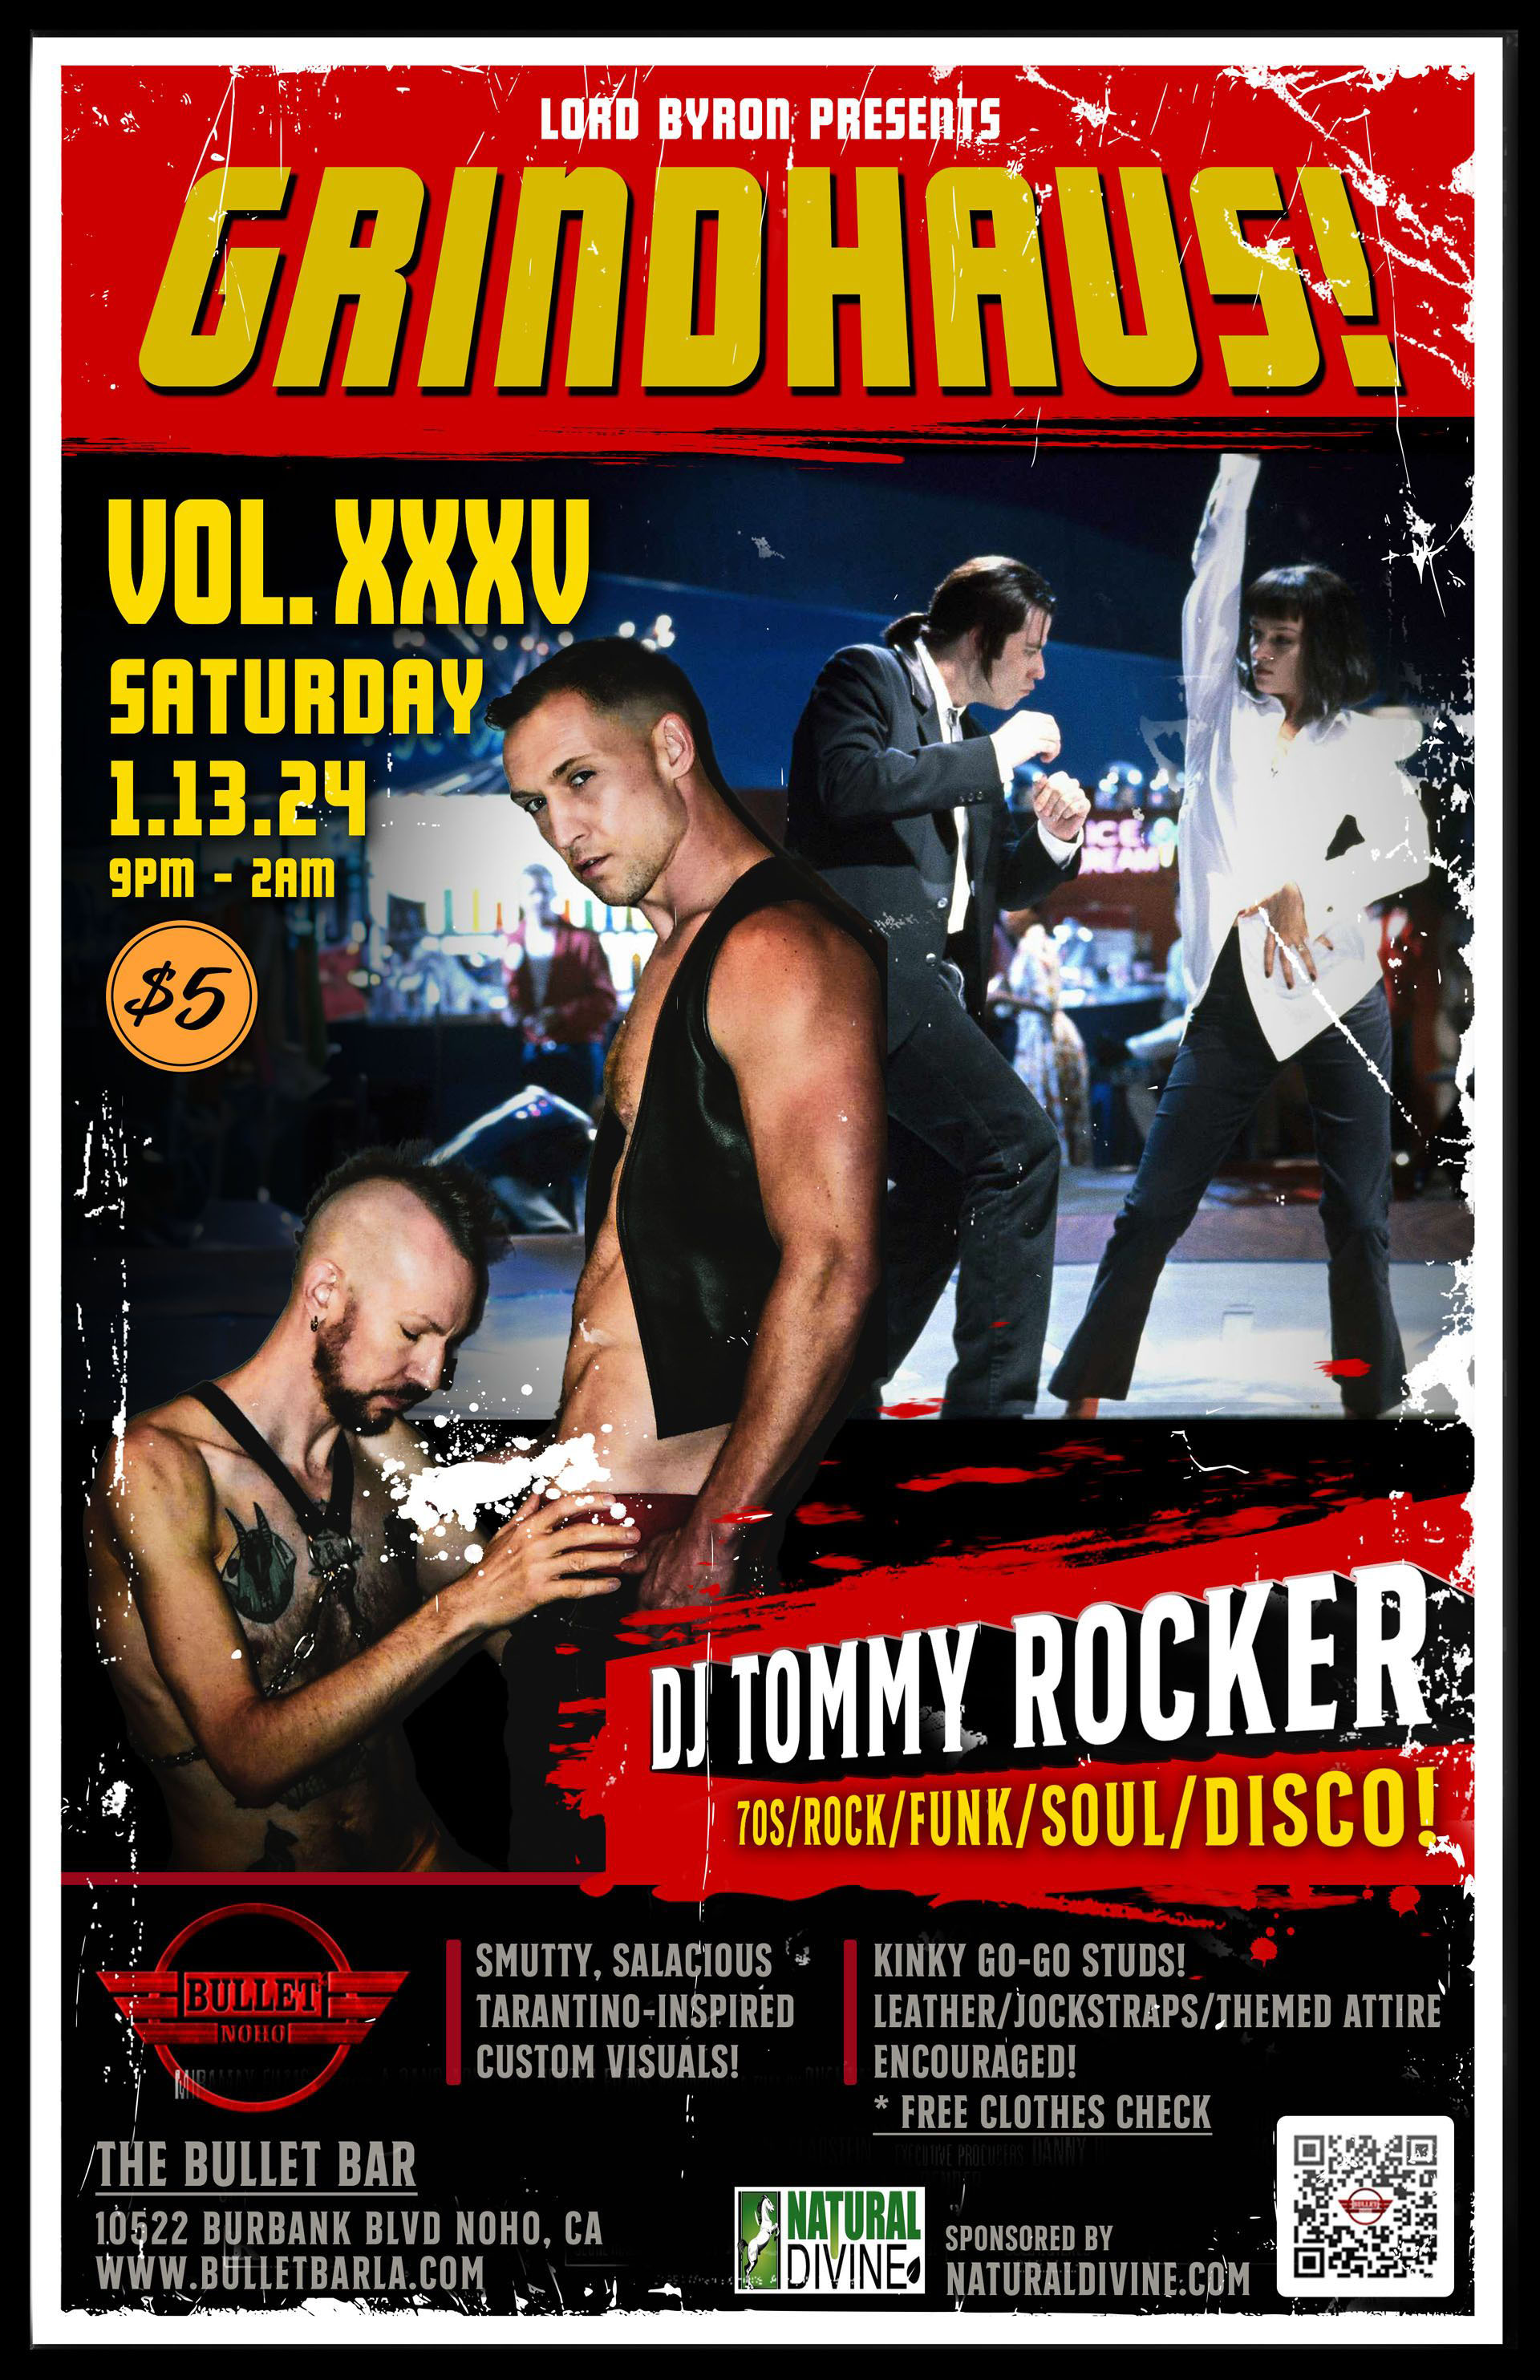 LORD BYRON Presents GRINDHAUS! VOL.XXXV with DJ TOMMY ROCKER at THE BULLET BAR: Saturday, 01/13/24 at 9:00 PM! $5 cover.